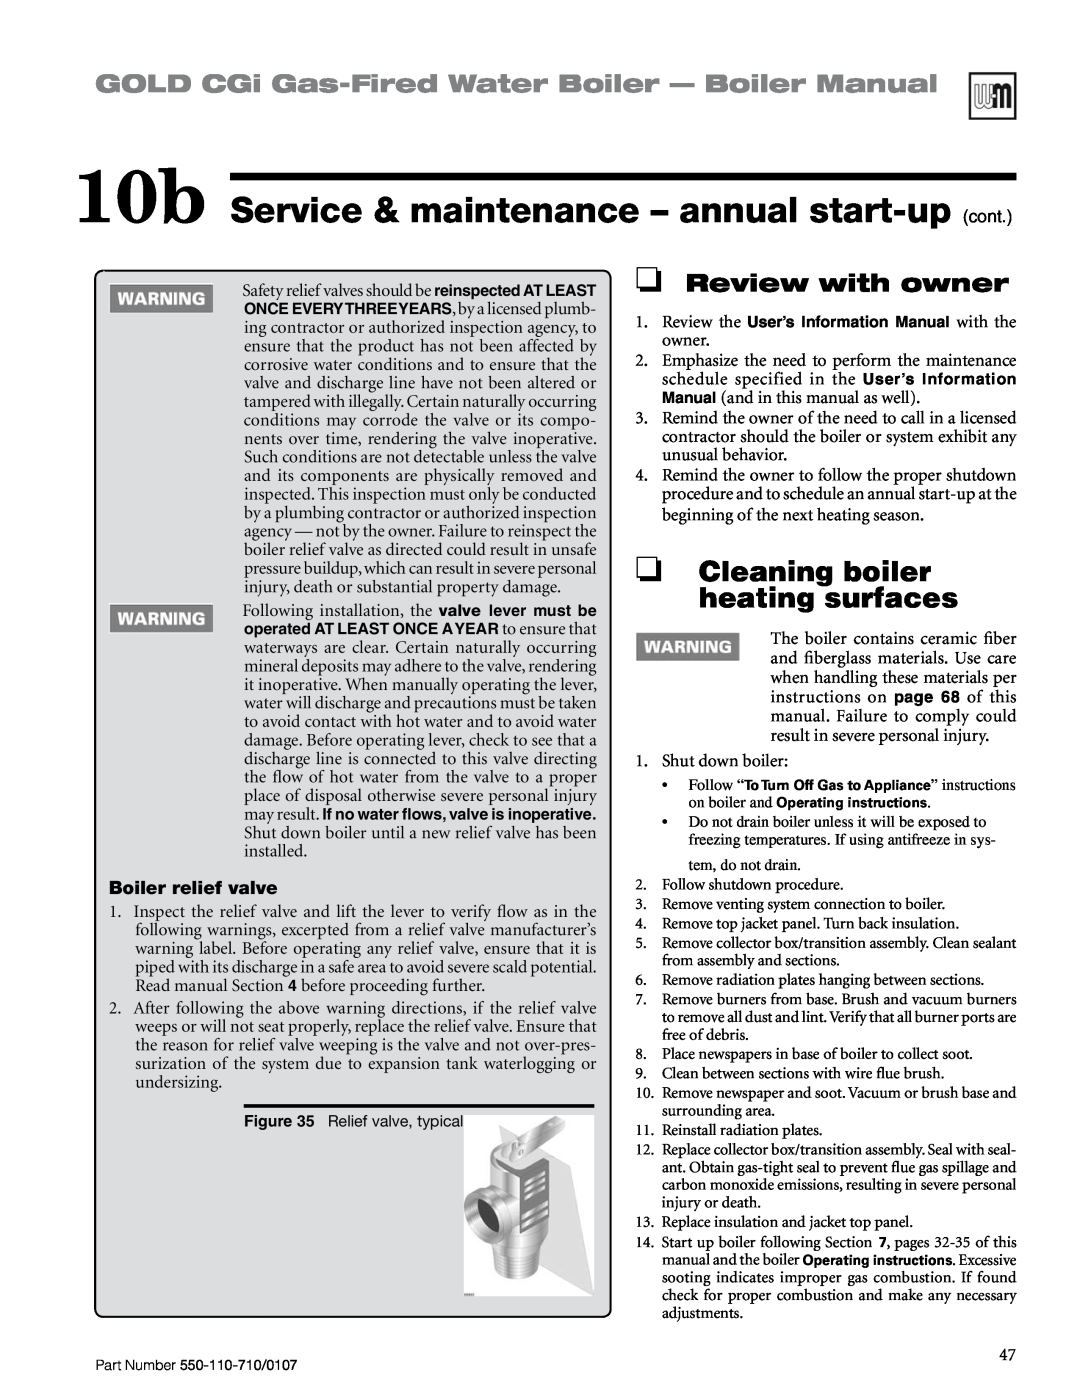 Weil-McLain 550-110-710/0107 manual Cleaning boiler heating surfaces, 10b Service & maintenance – annual start-up cont 